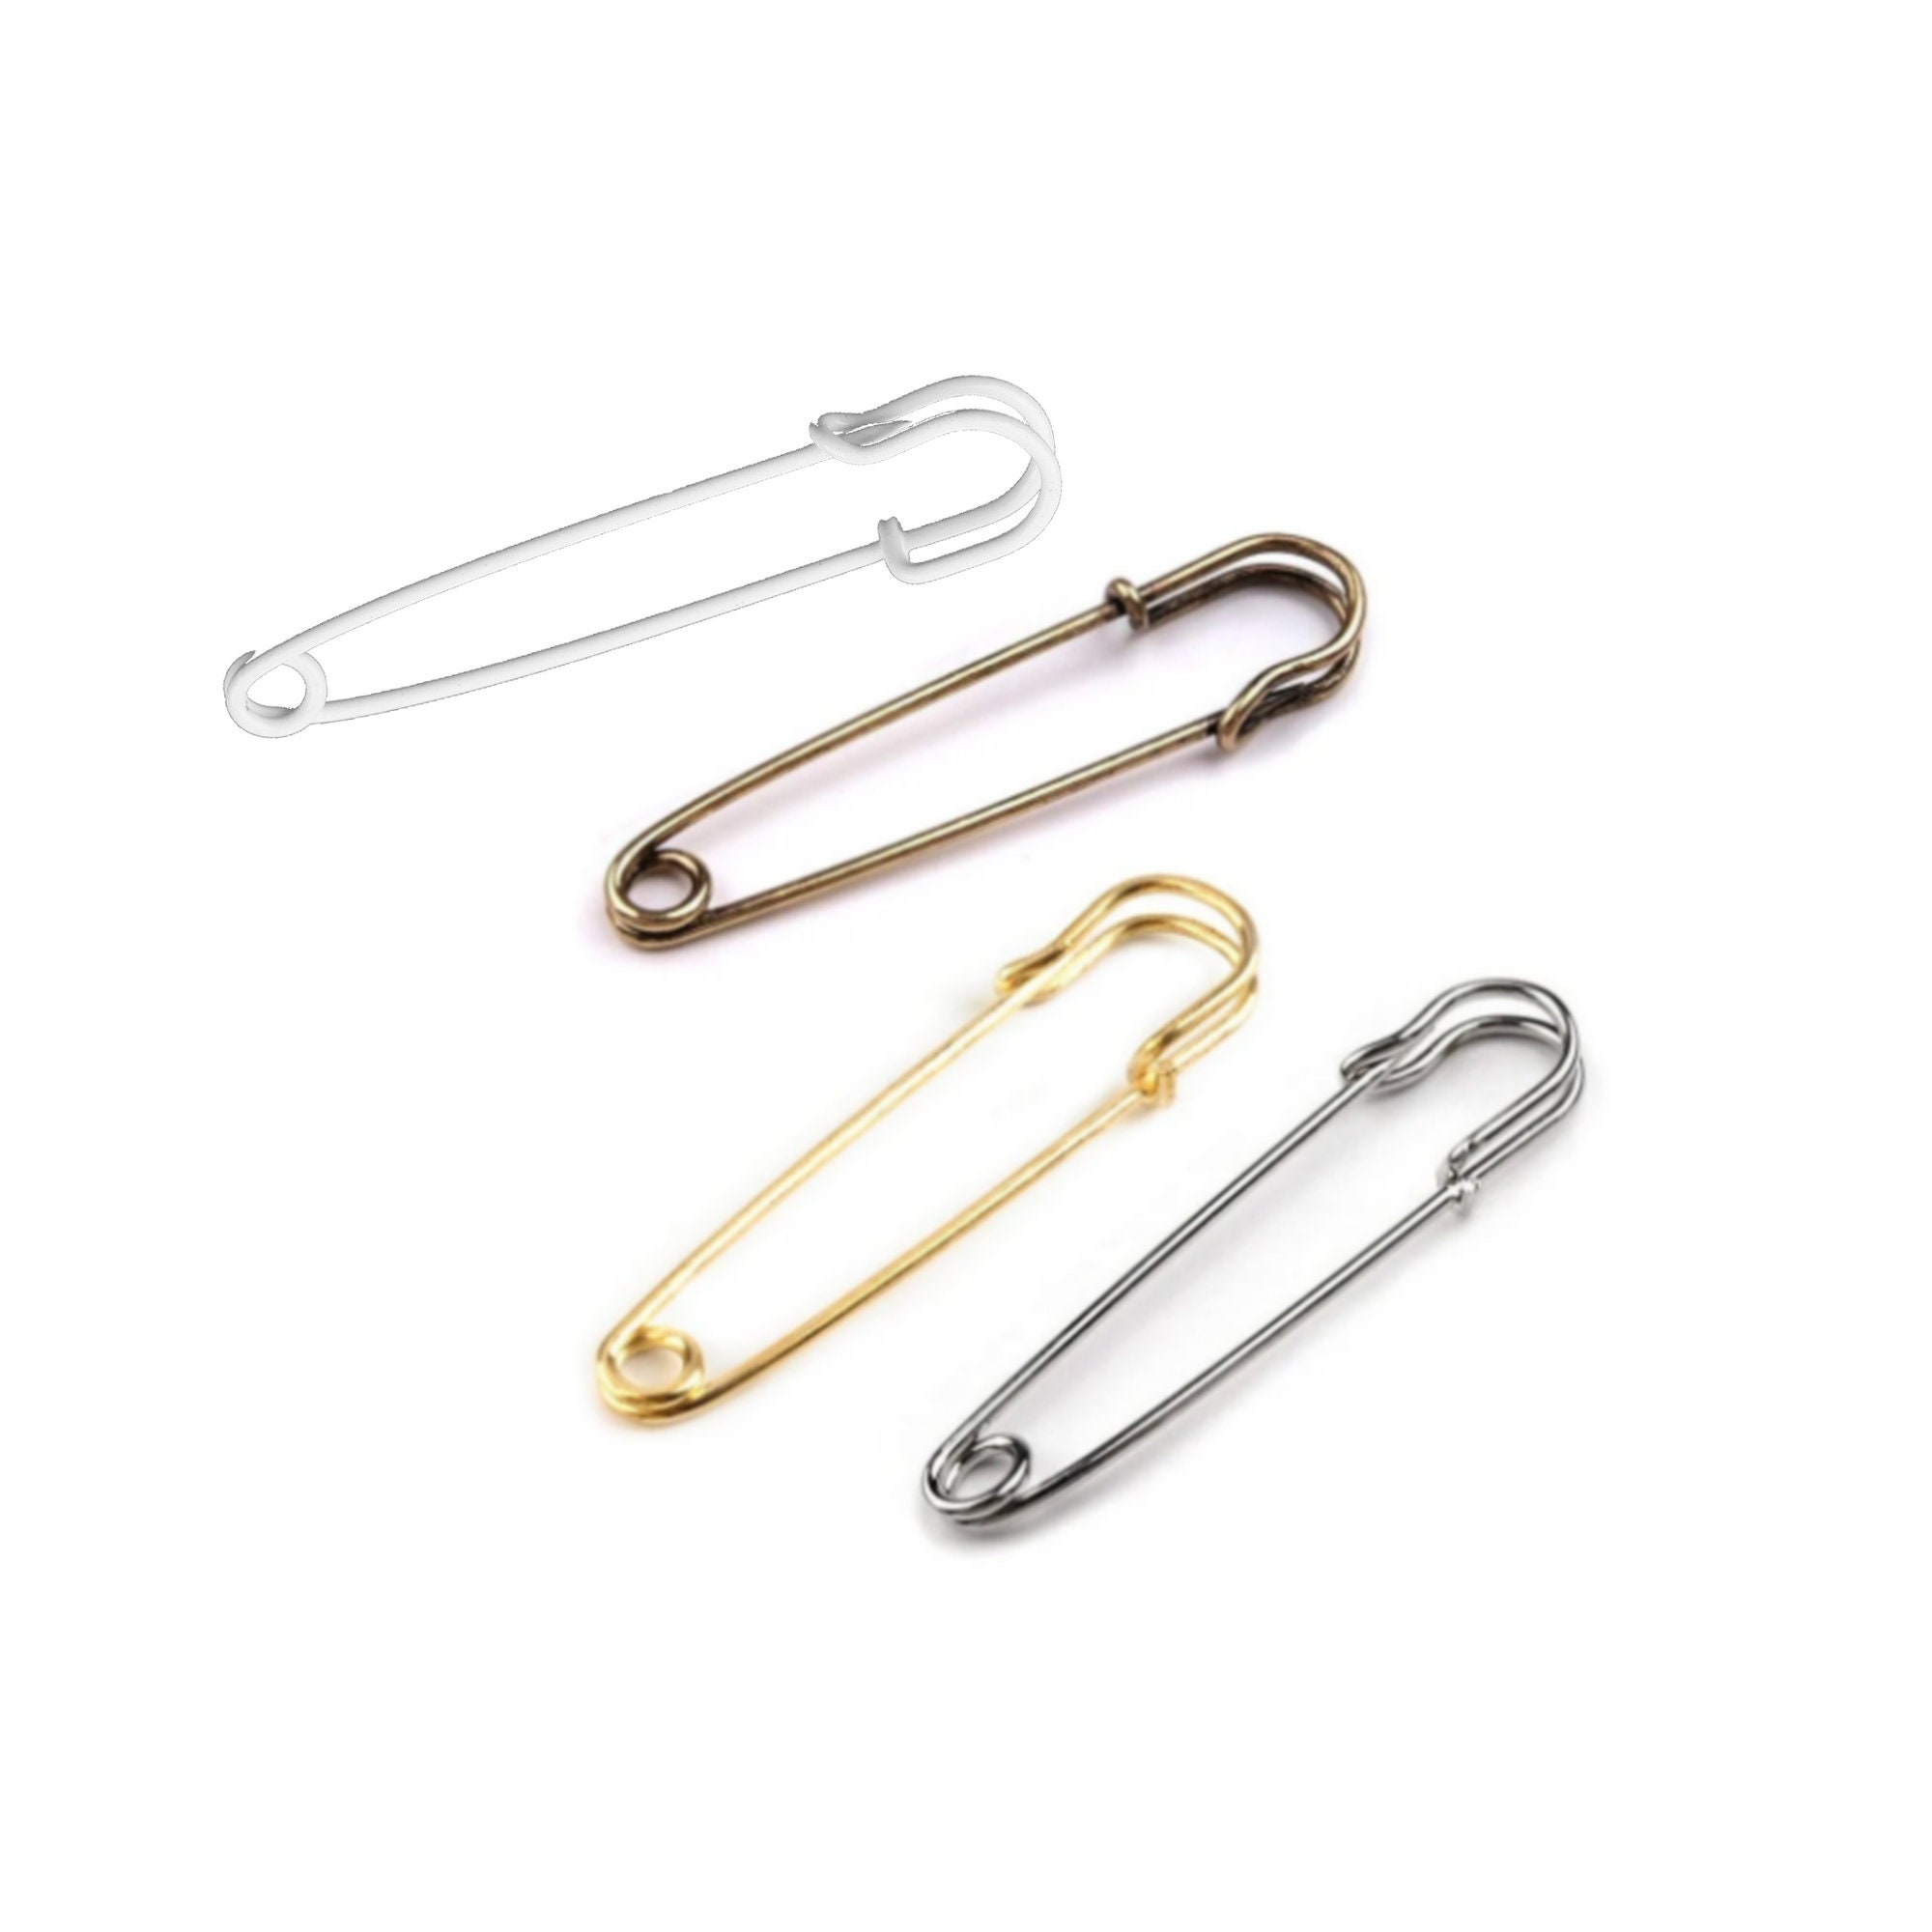 Large Safety Pin Silver Blanket Pin Horse Pin Giant Heavy Duty Pins Brooch  Decorative Pins Charms